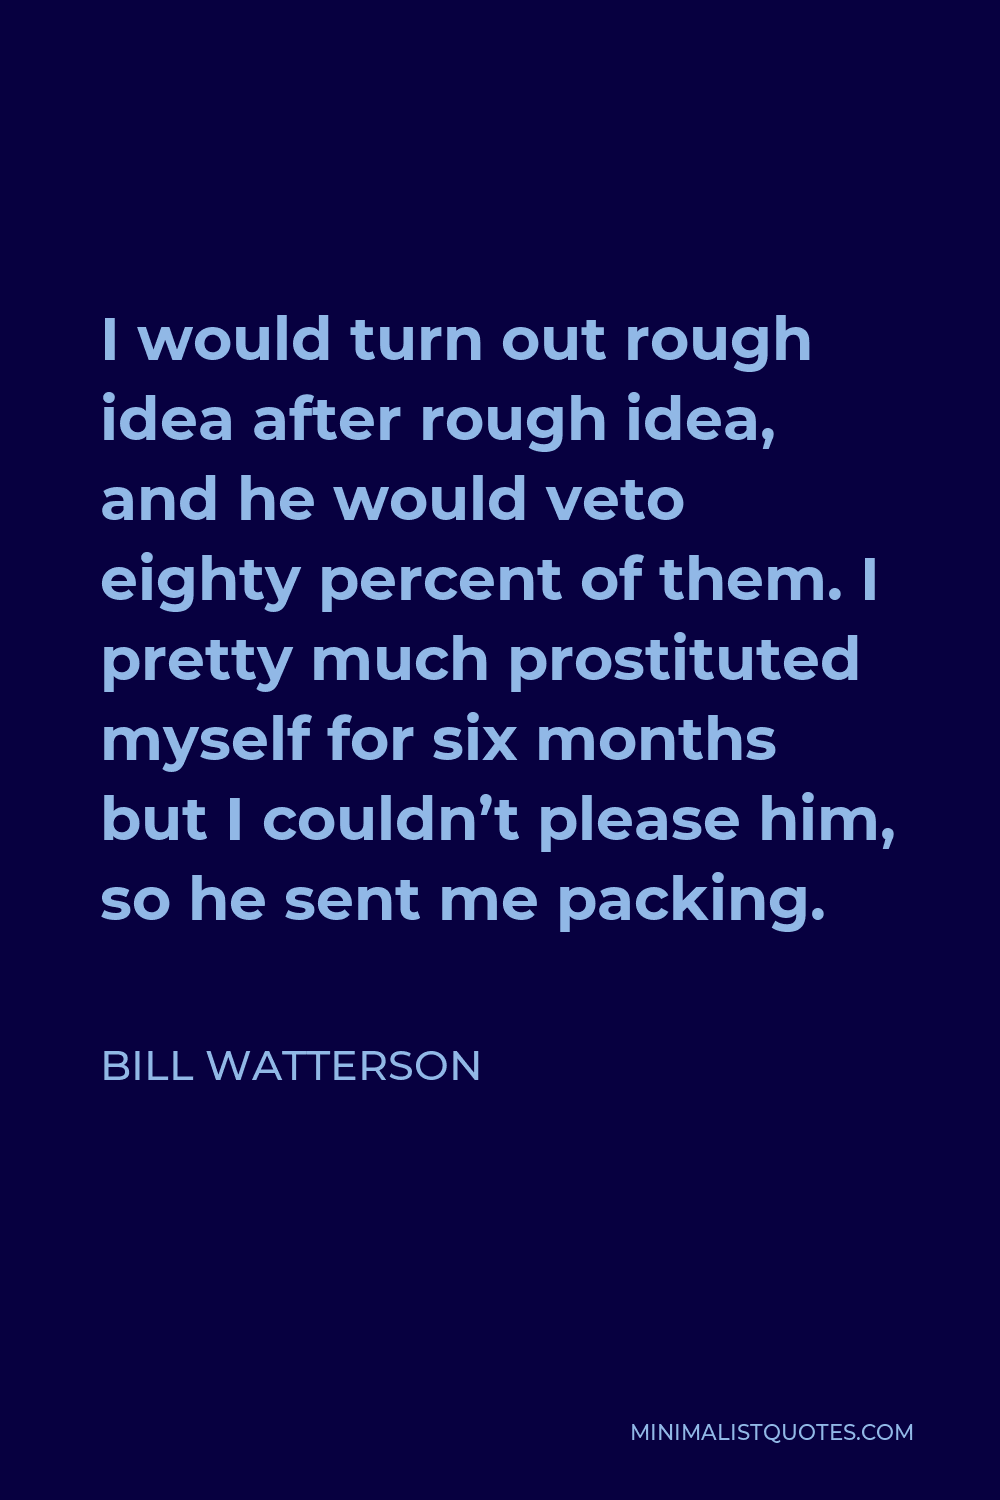 Bill Watterson Quote - I would turn out rough idea after rough idea, and he would veto eighty percent of them. I pretty much prostituted myself for six months but I couldn’t please him, so he sent me packing.